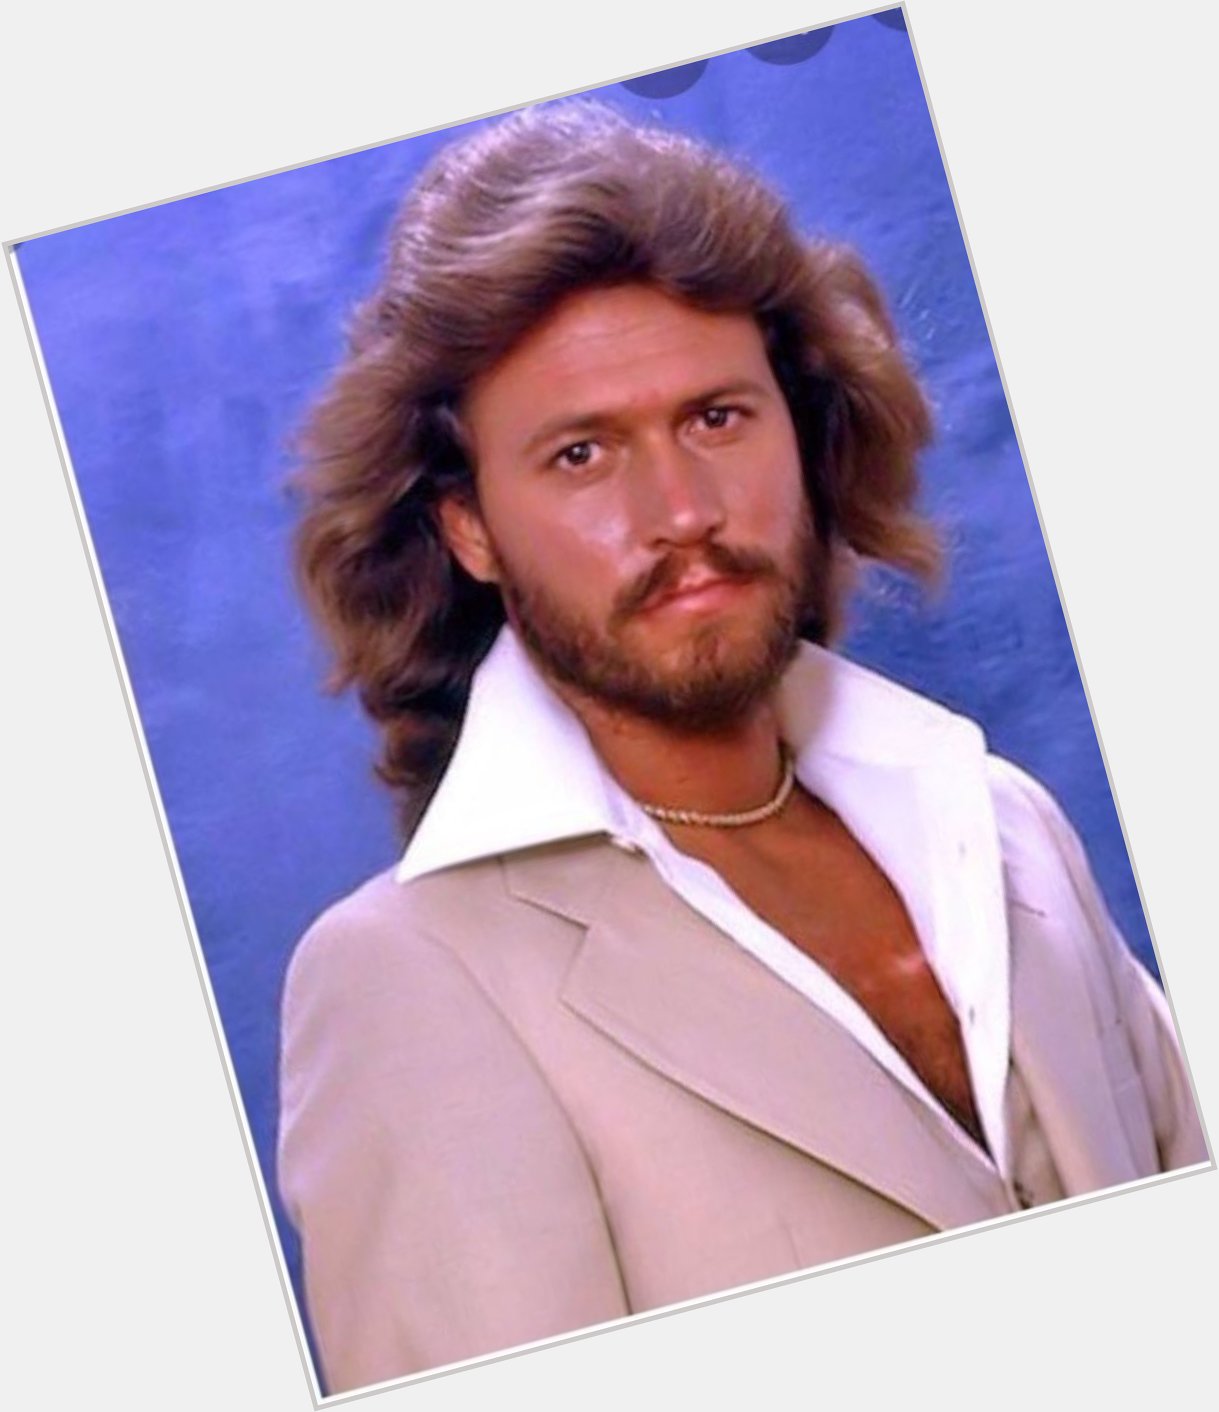 Happy 76th birthday to the great Barry Gibb!  